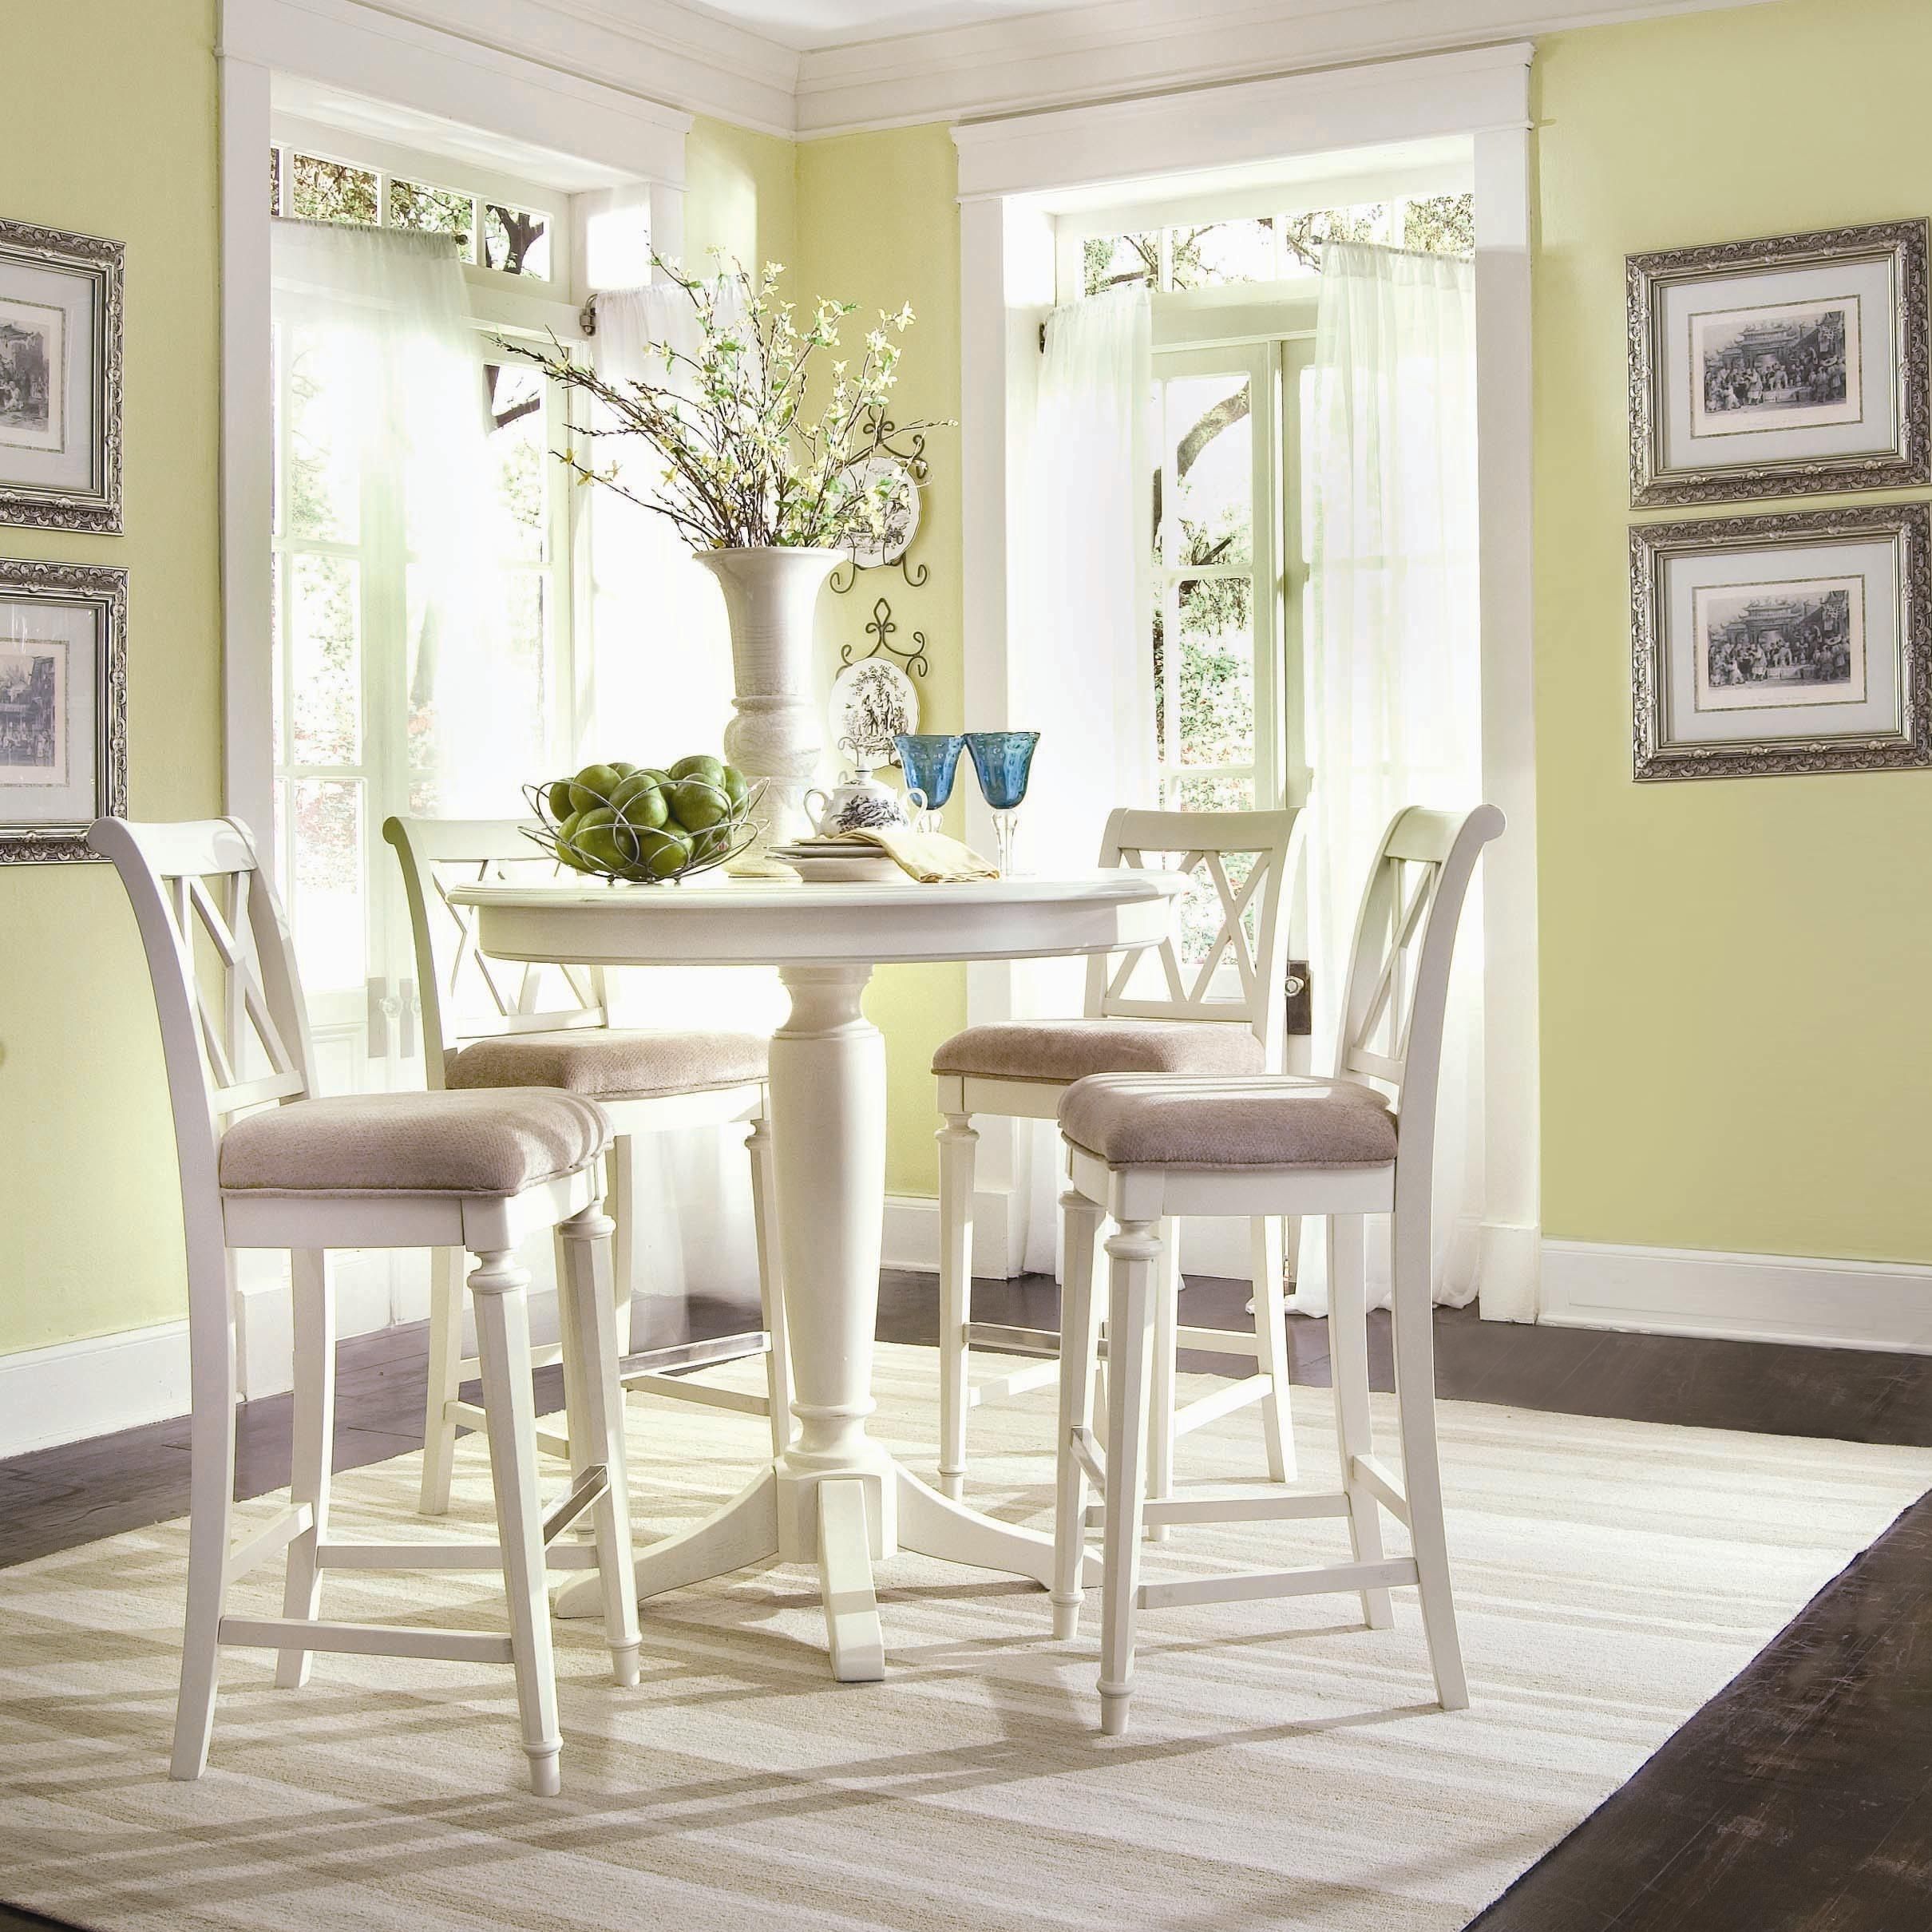 Create A Cottage Look With A Small Gathering Table! #cottage #life Throughout Latest Palazzo 6 Piece Dining Sets With Pearson Grey Side Chairs (View 10 of 20)